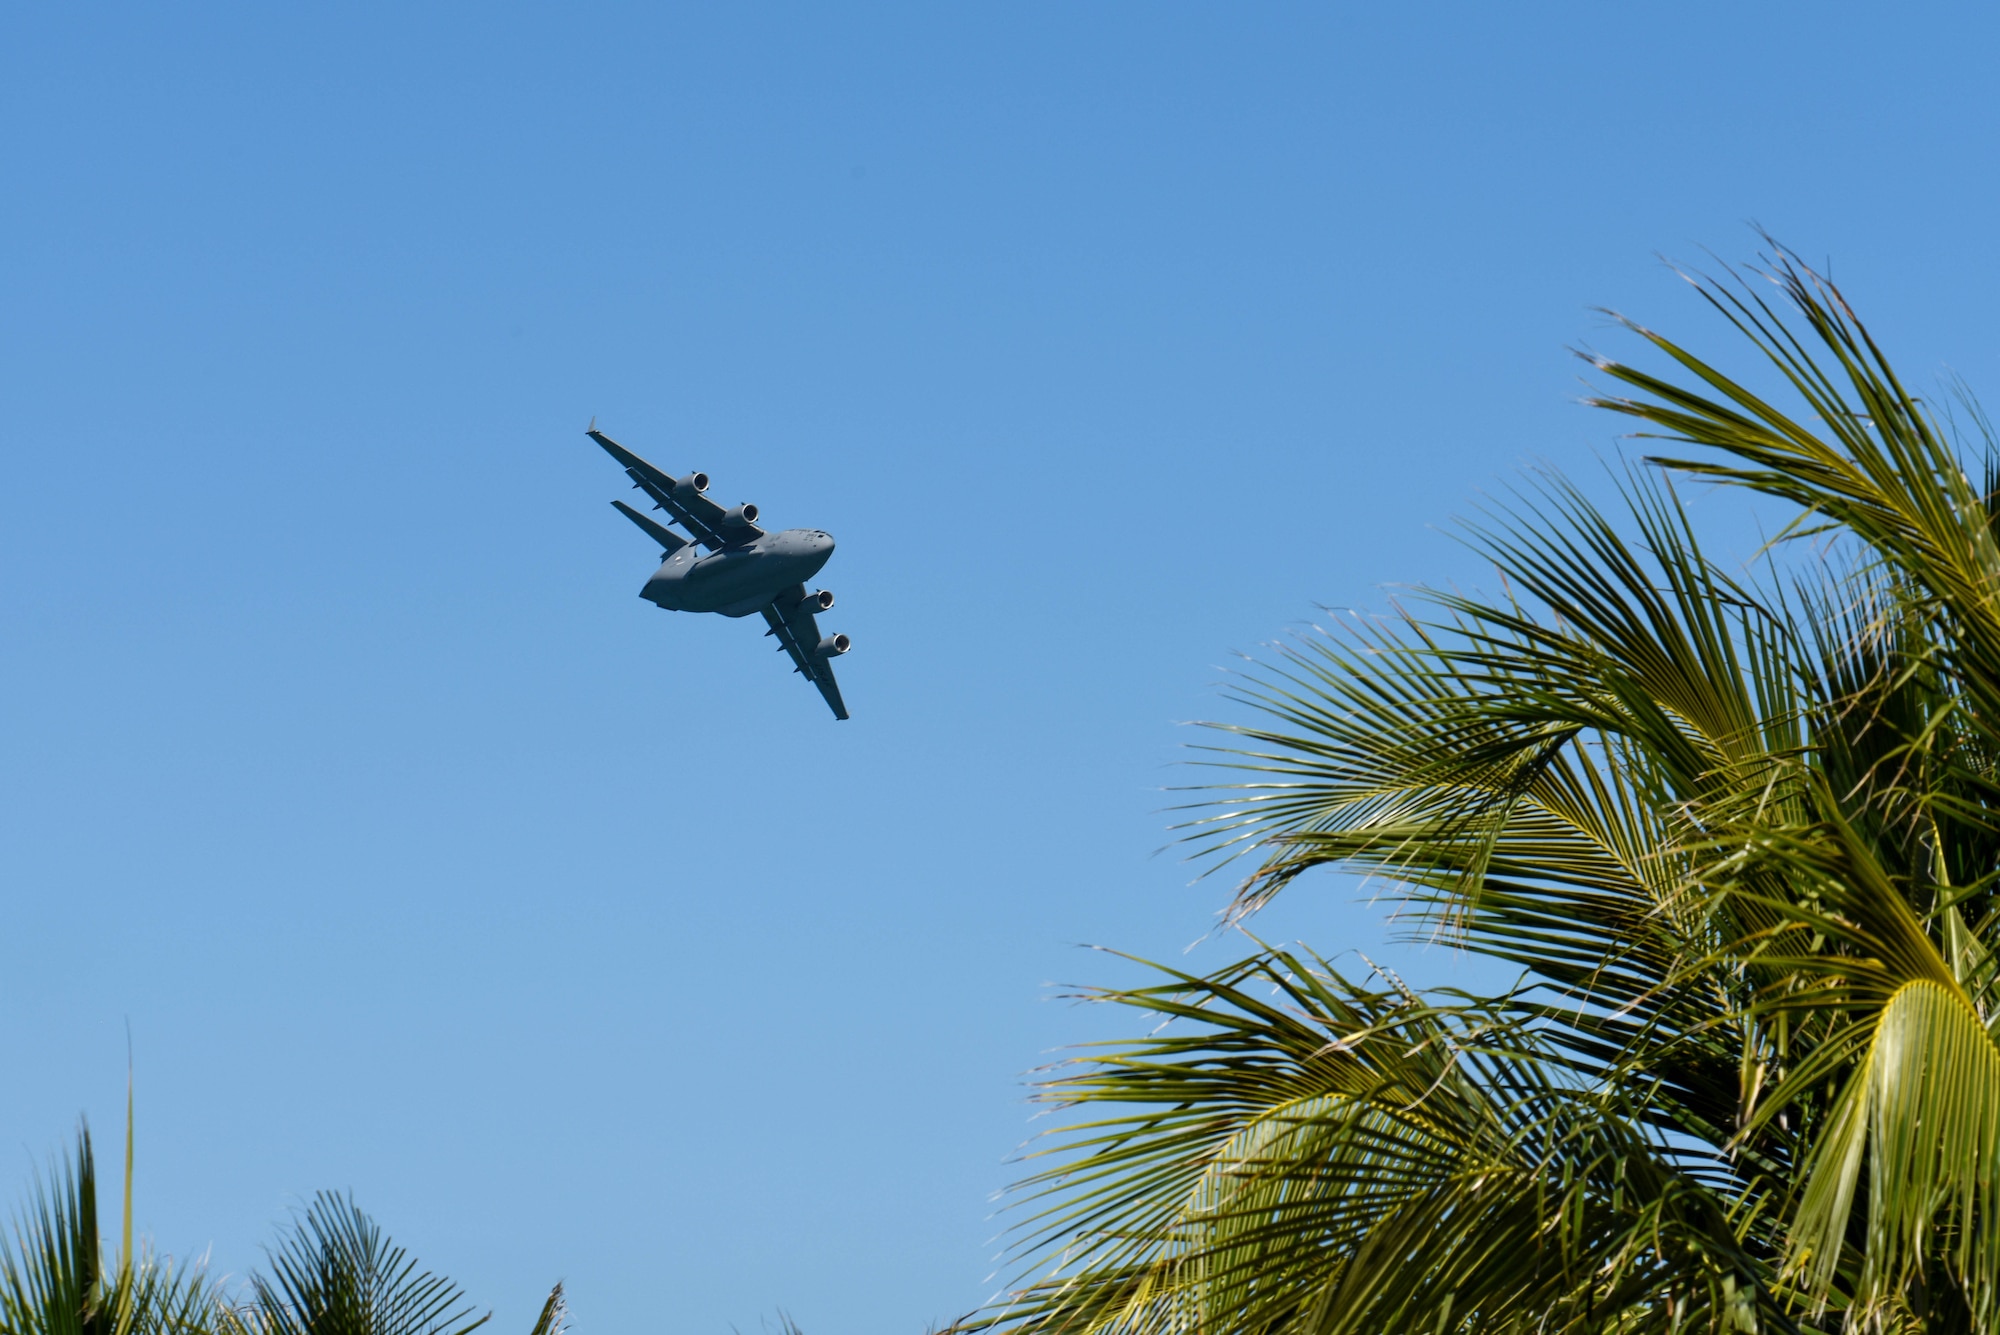 A C-17 Globemaster III, piloted by members of the C-17 West Coast Demo Team from Joint Base Lewis-McChord, Washington, flies through the skies above Miami Beach, Florida, May 29, 2021. The demonstration was a part of the National Salute to Our Heroes Hyundai Air and Sea Show, which had over 100,000 viewers both days of the show. (U.S. Air Force photo by Senior Airman Mikayla Heineck)